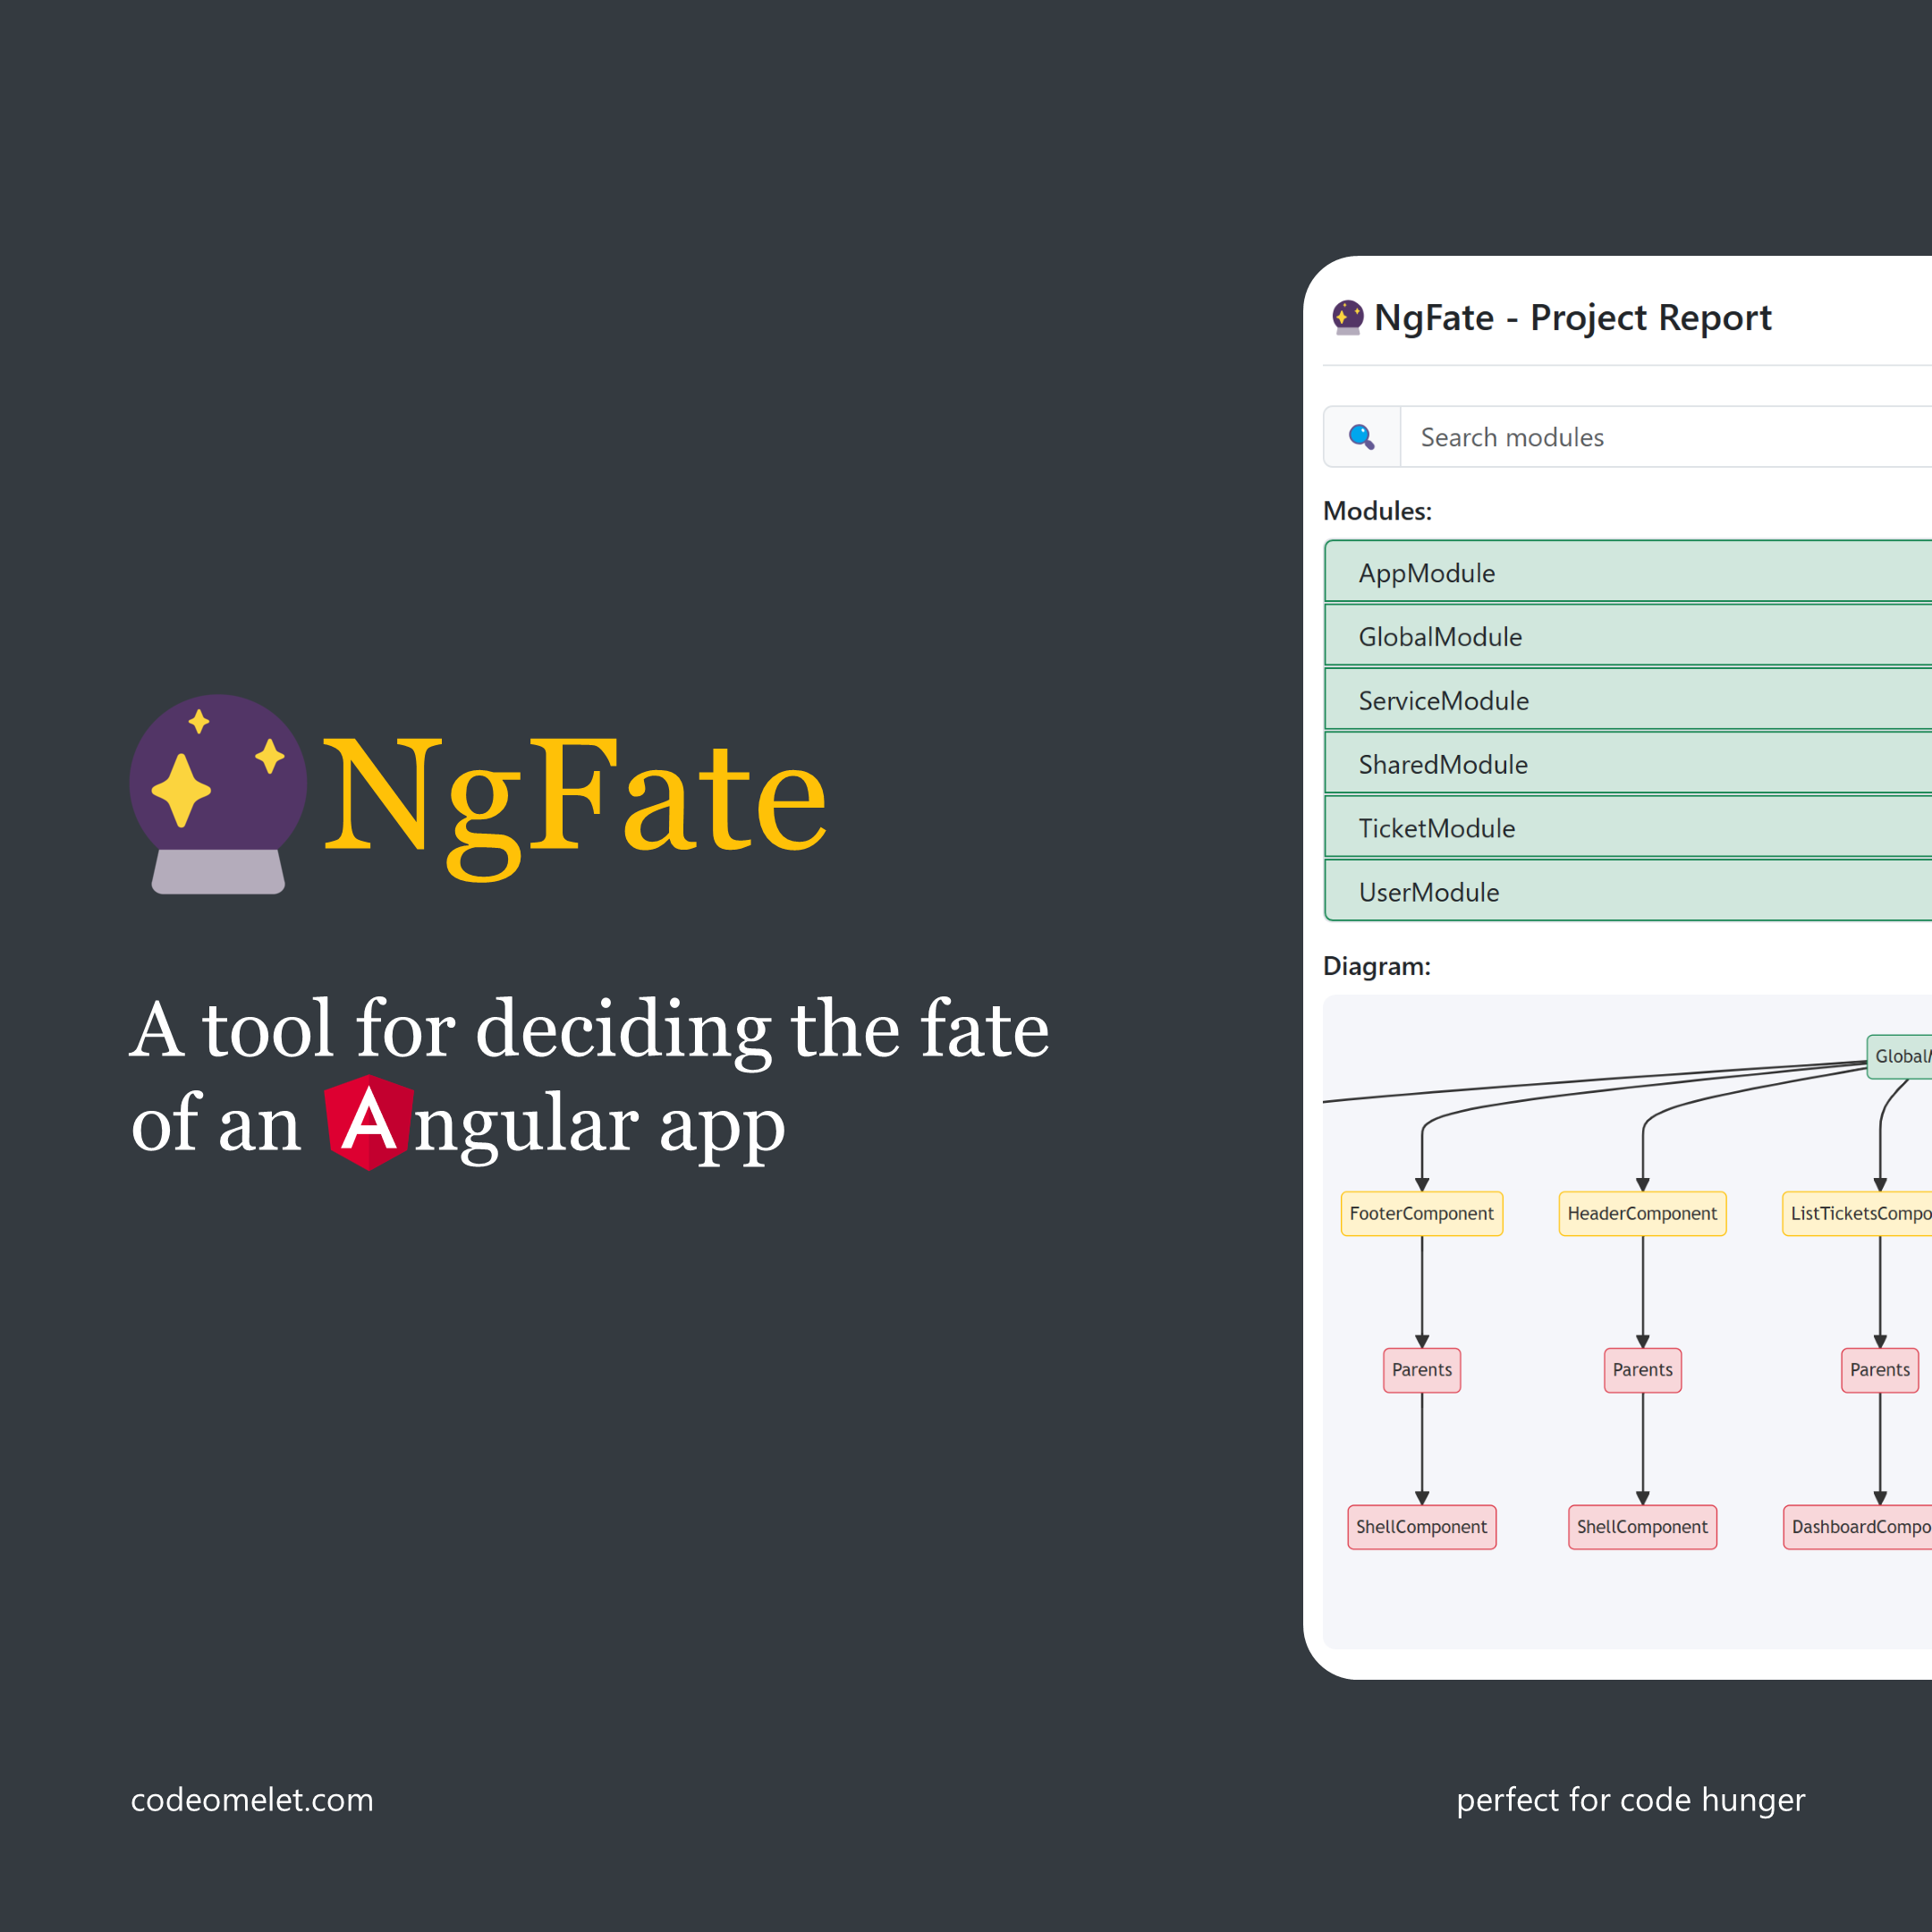 NgFate - A tool for deciding the fate of an Angular app